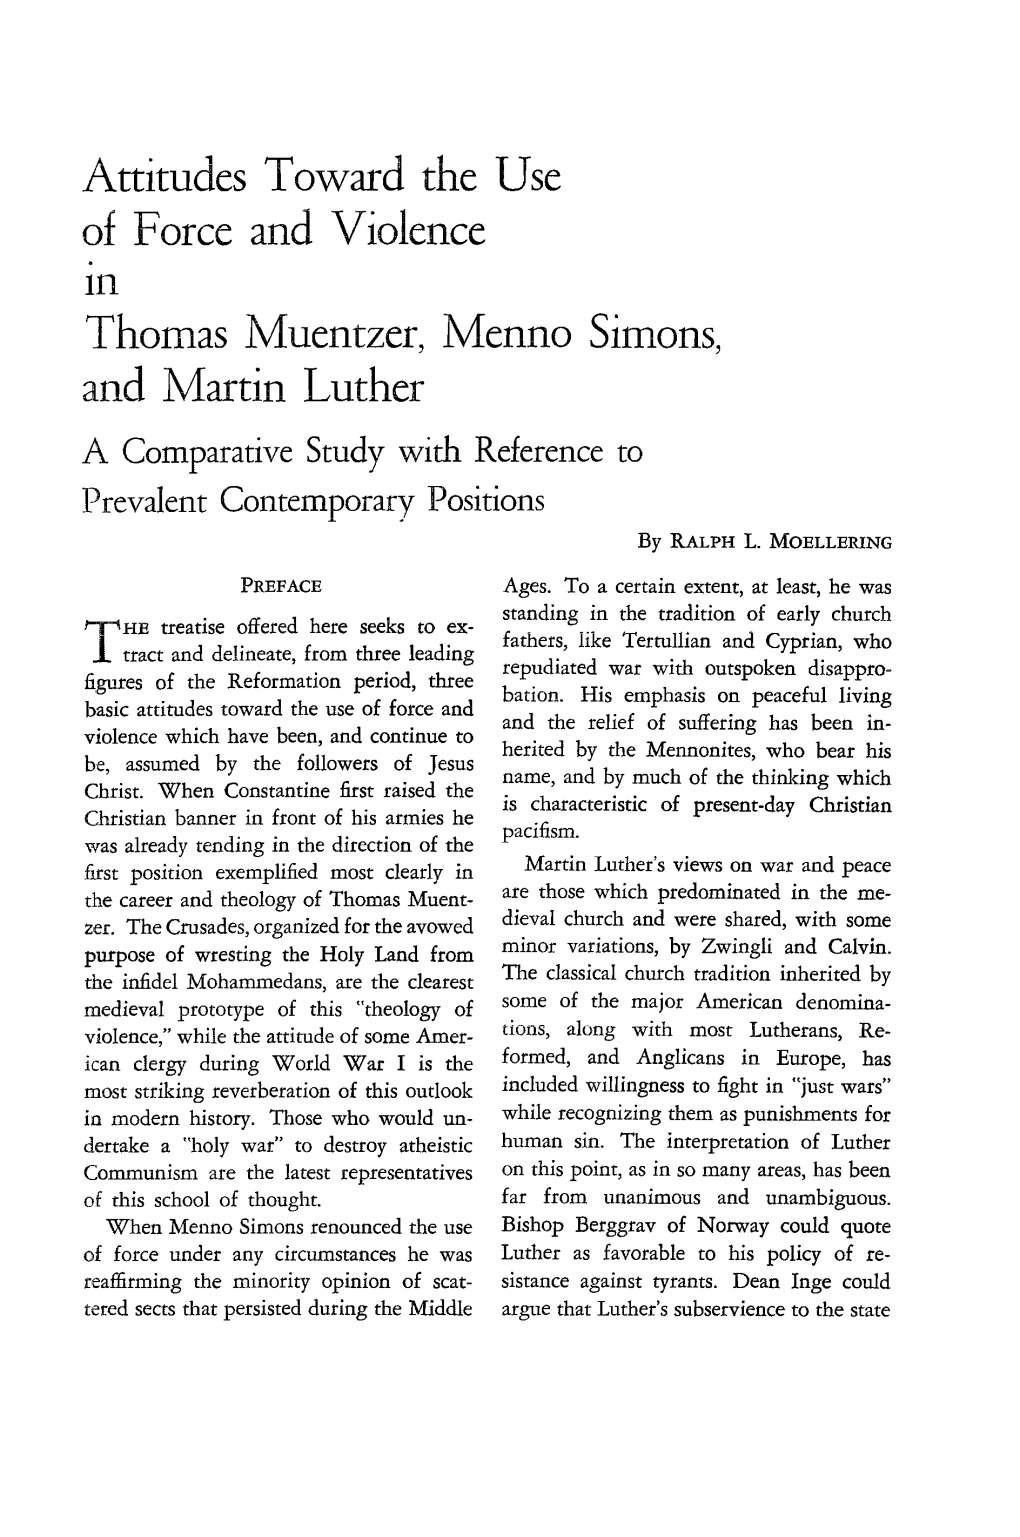 Of Force and Violence R 'Homas Muentzer, Menno Simons, And